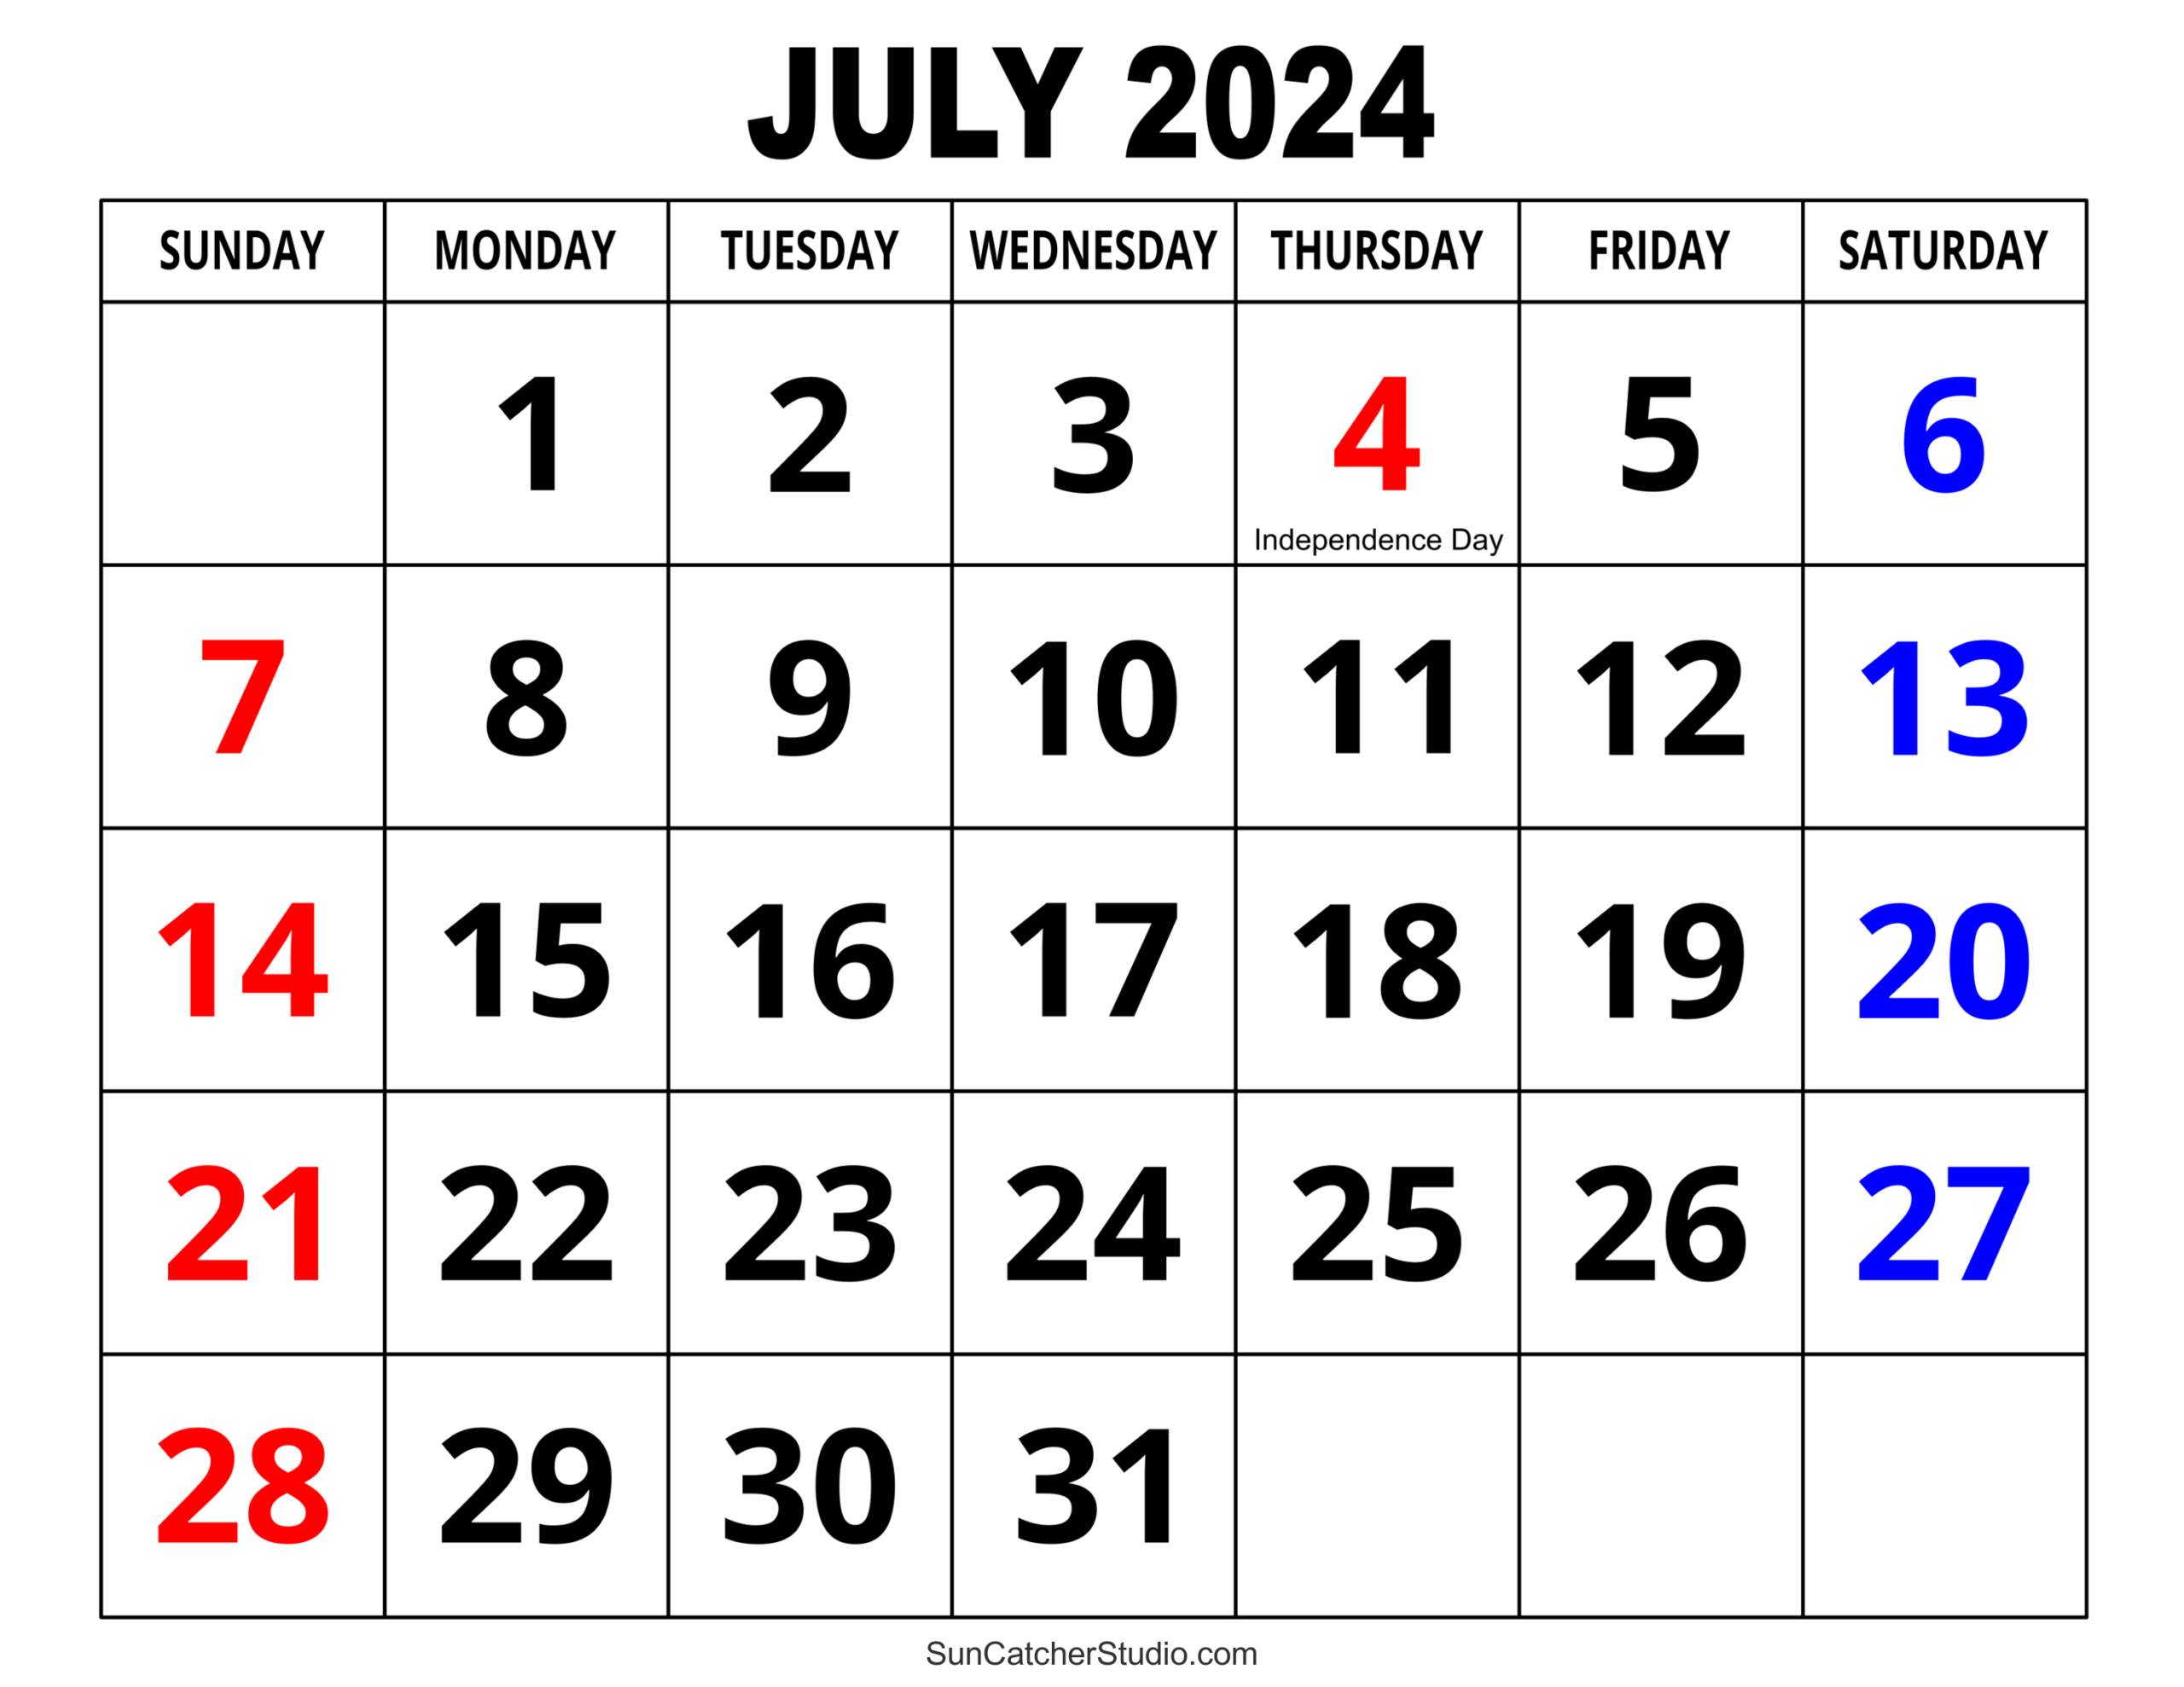 July 2024 Calendar (Free Printable) – Diy Projects, Patterns | 8Th July 2024 Calendar Printable